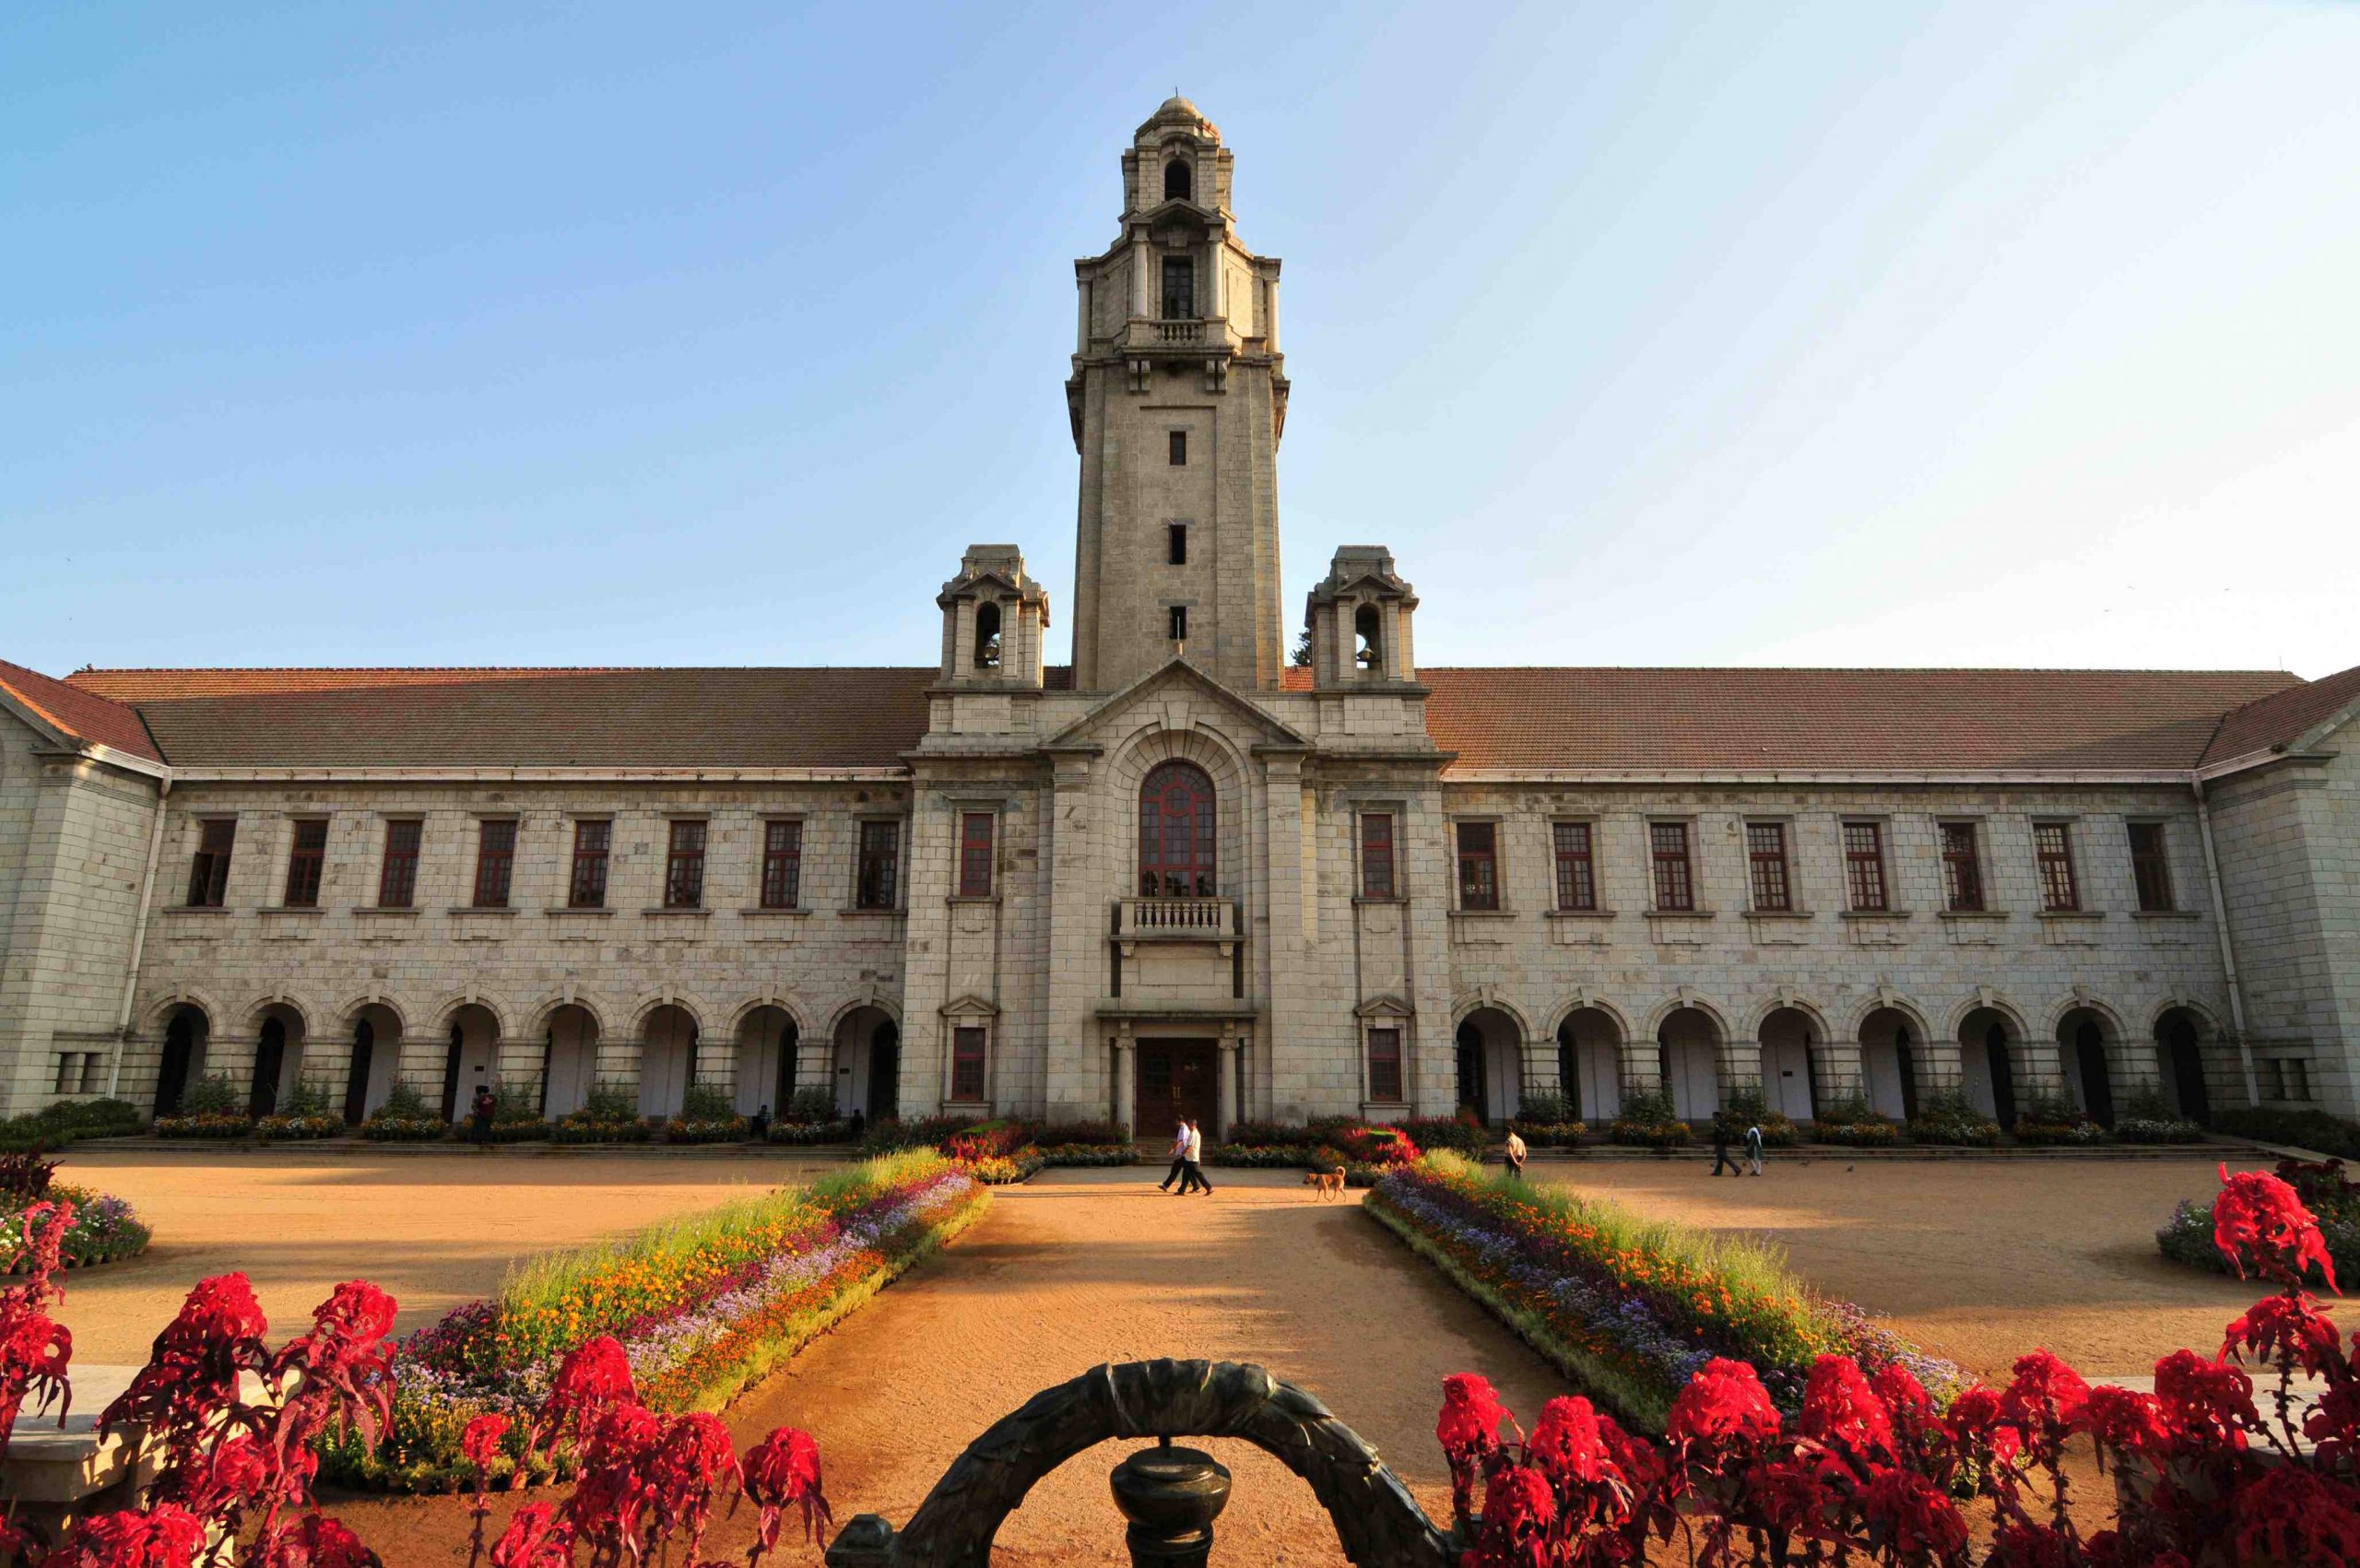 B.Sc physics hons, IISc, Indian Institute of Science